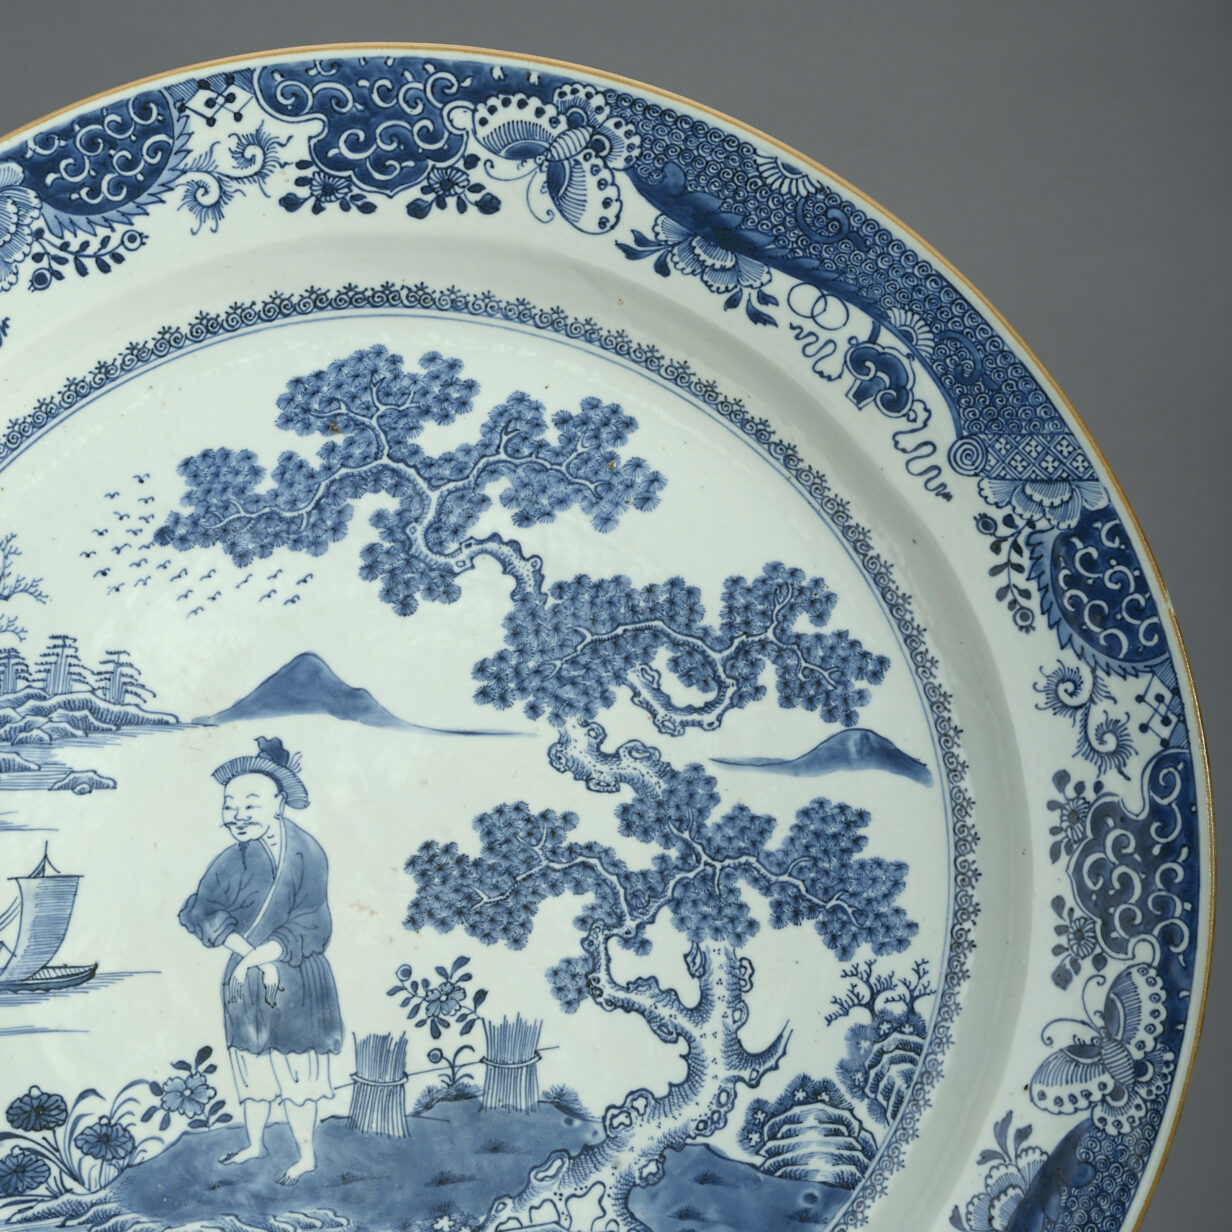 Large scale 18th century chinese export blue & white porcelain charger